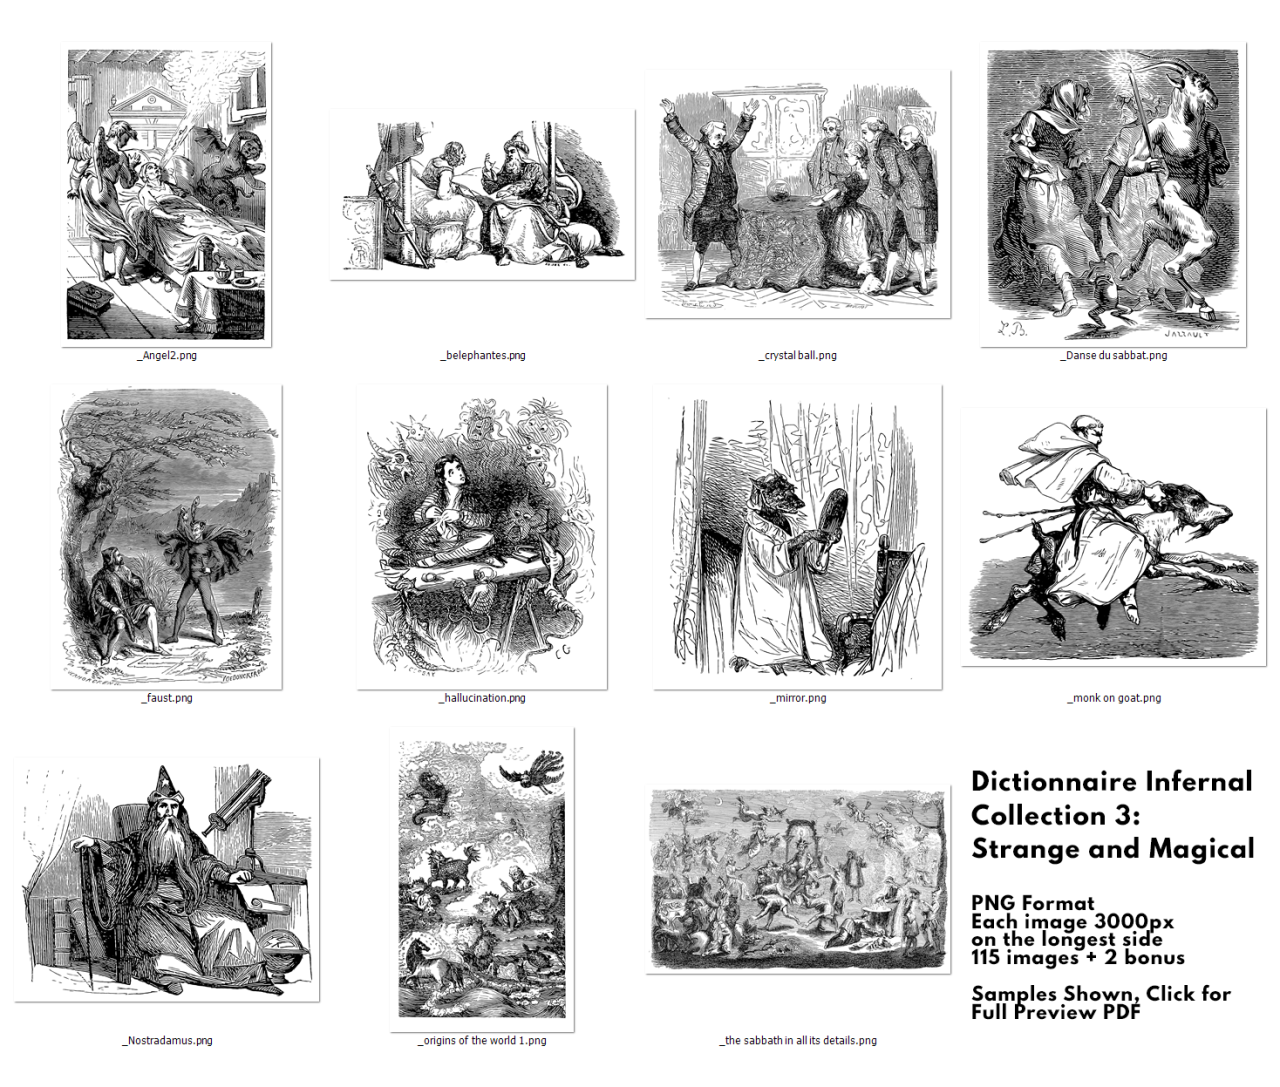 dictionnaire infernal illustrated